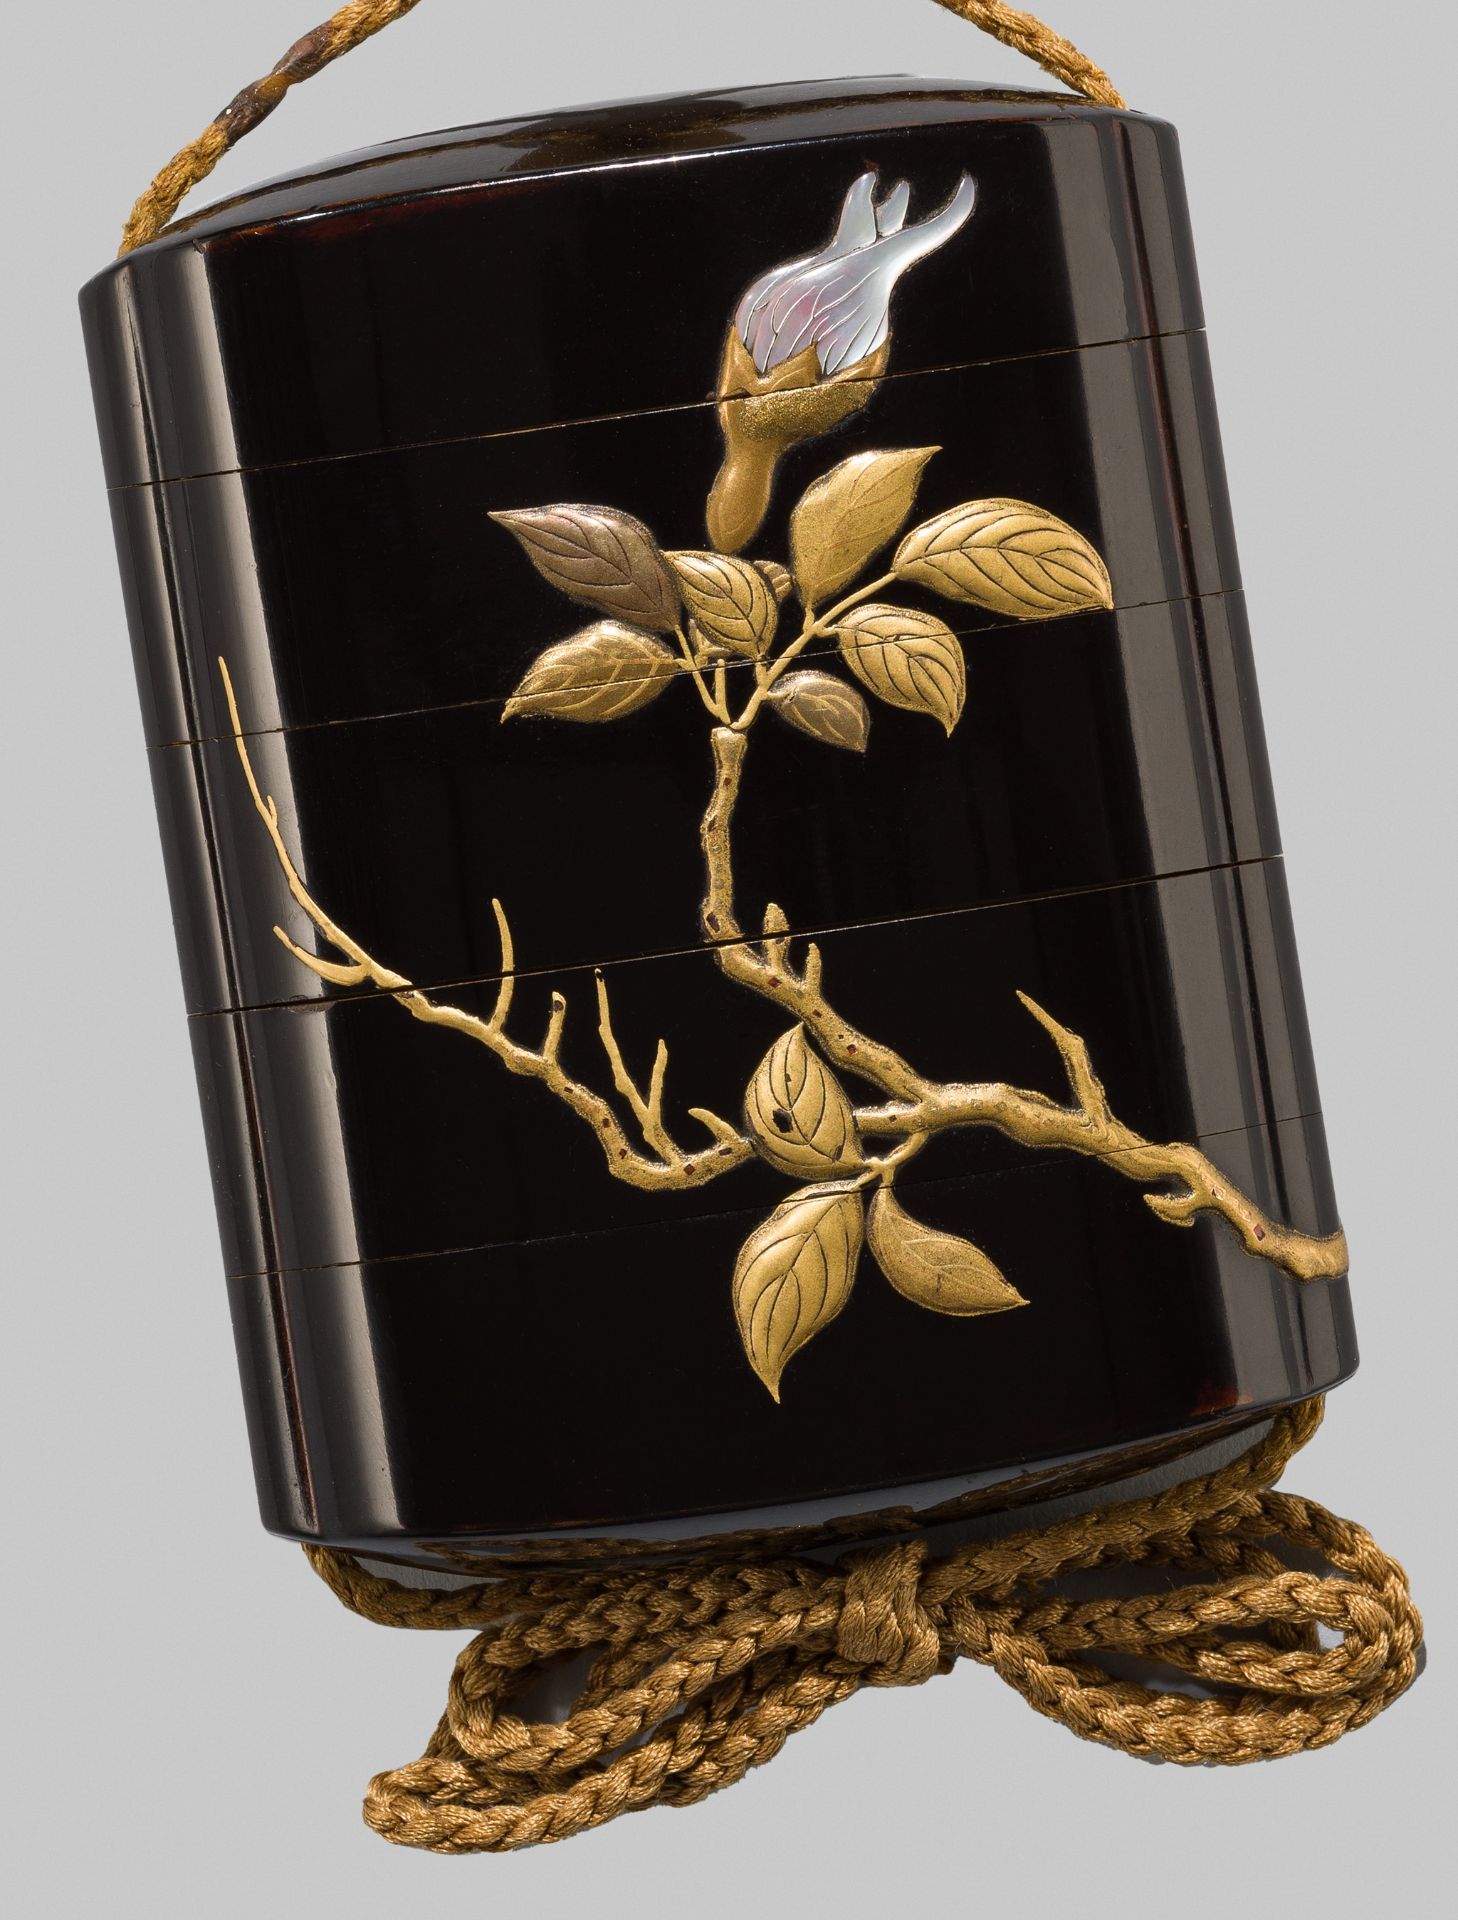 AN ELEGANT INLAID BLACK LACQUER FOUR-CASE INRO WITH CAMELLIA BLOSSOMS - Image 2 of 7